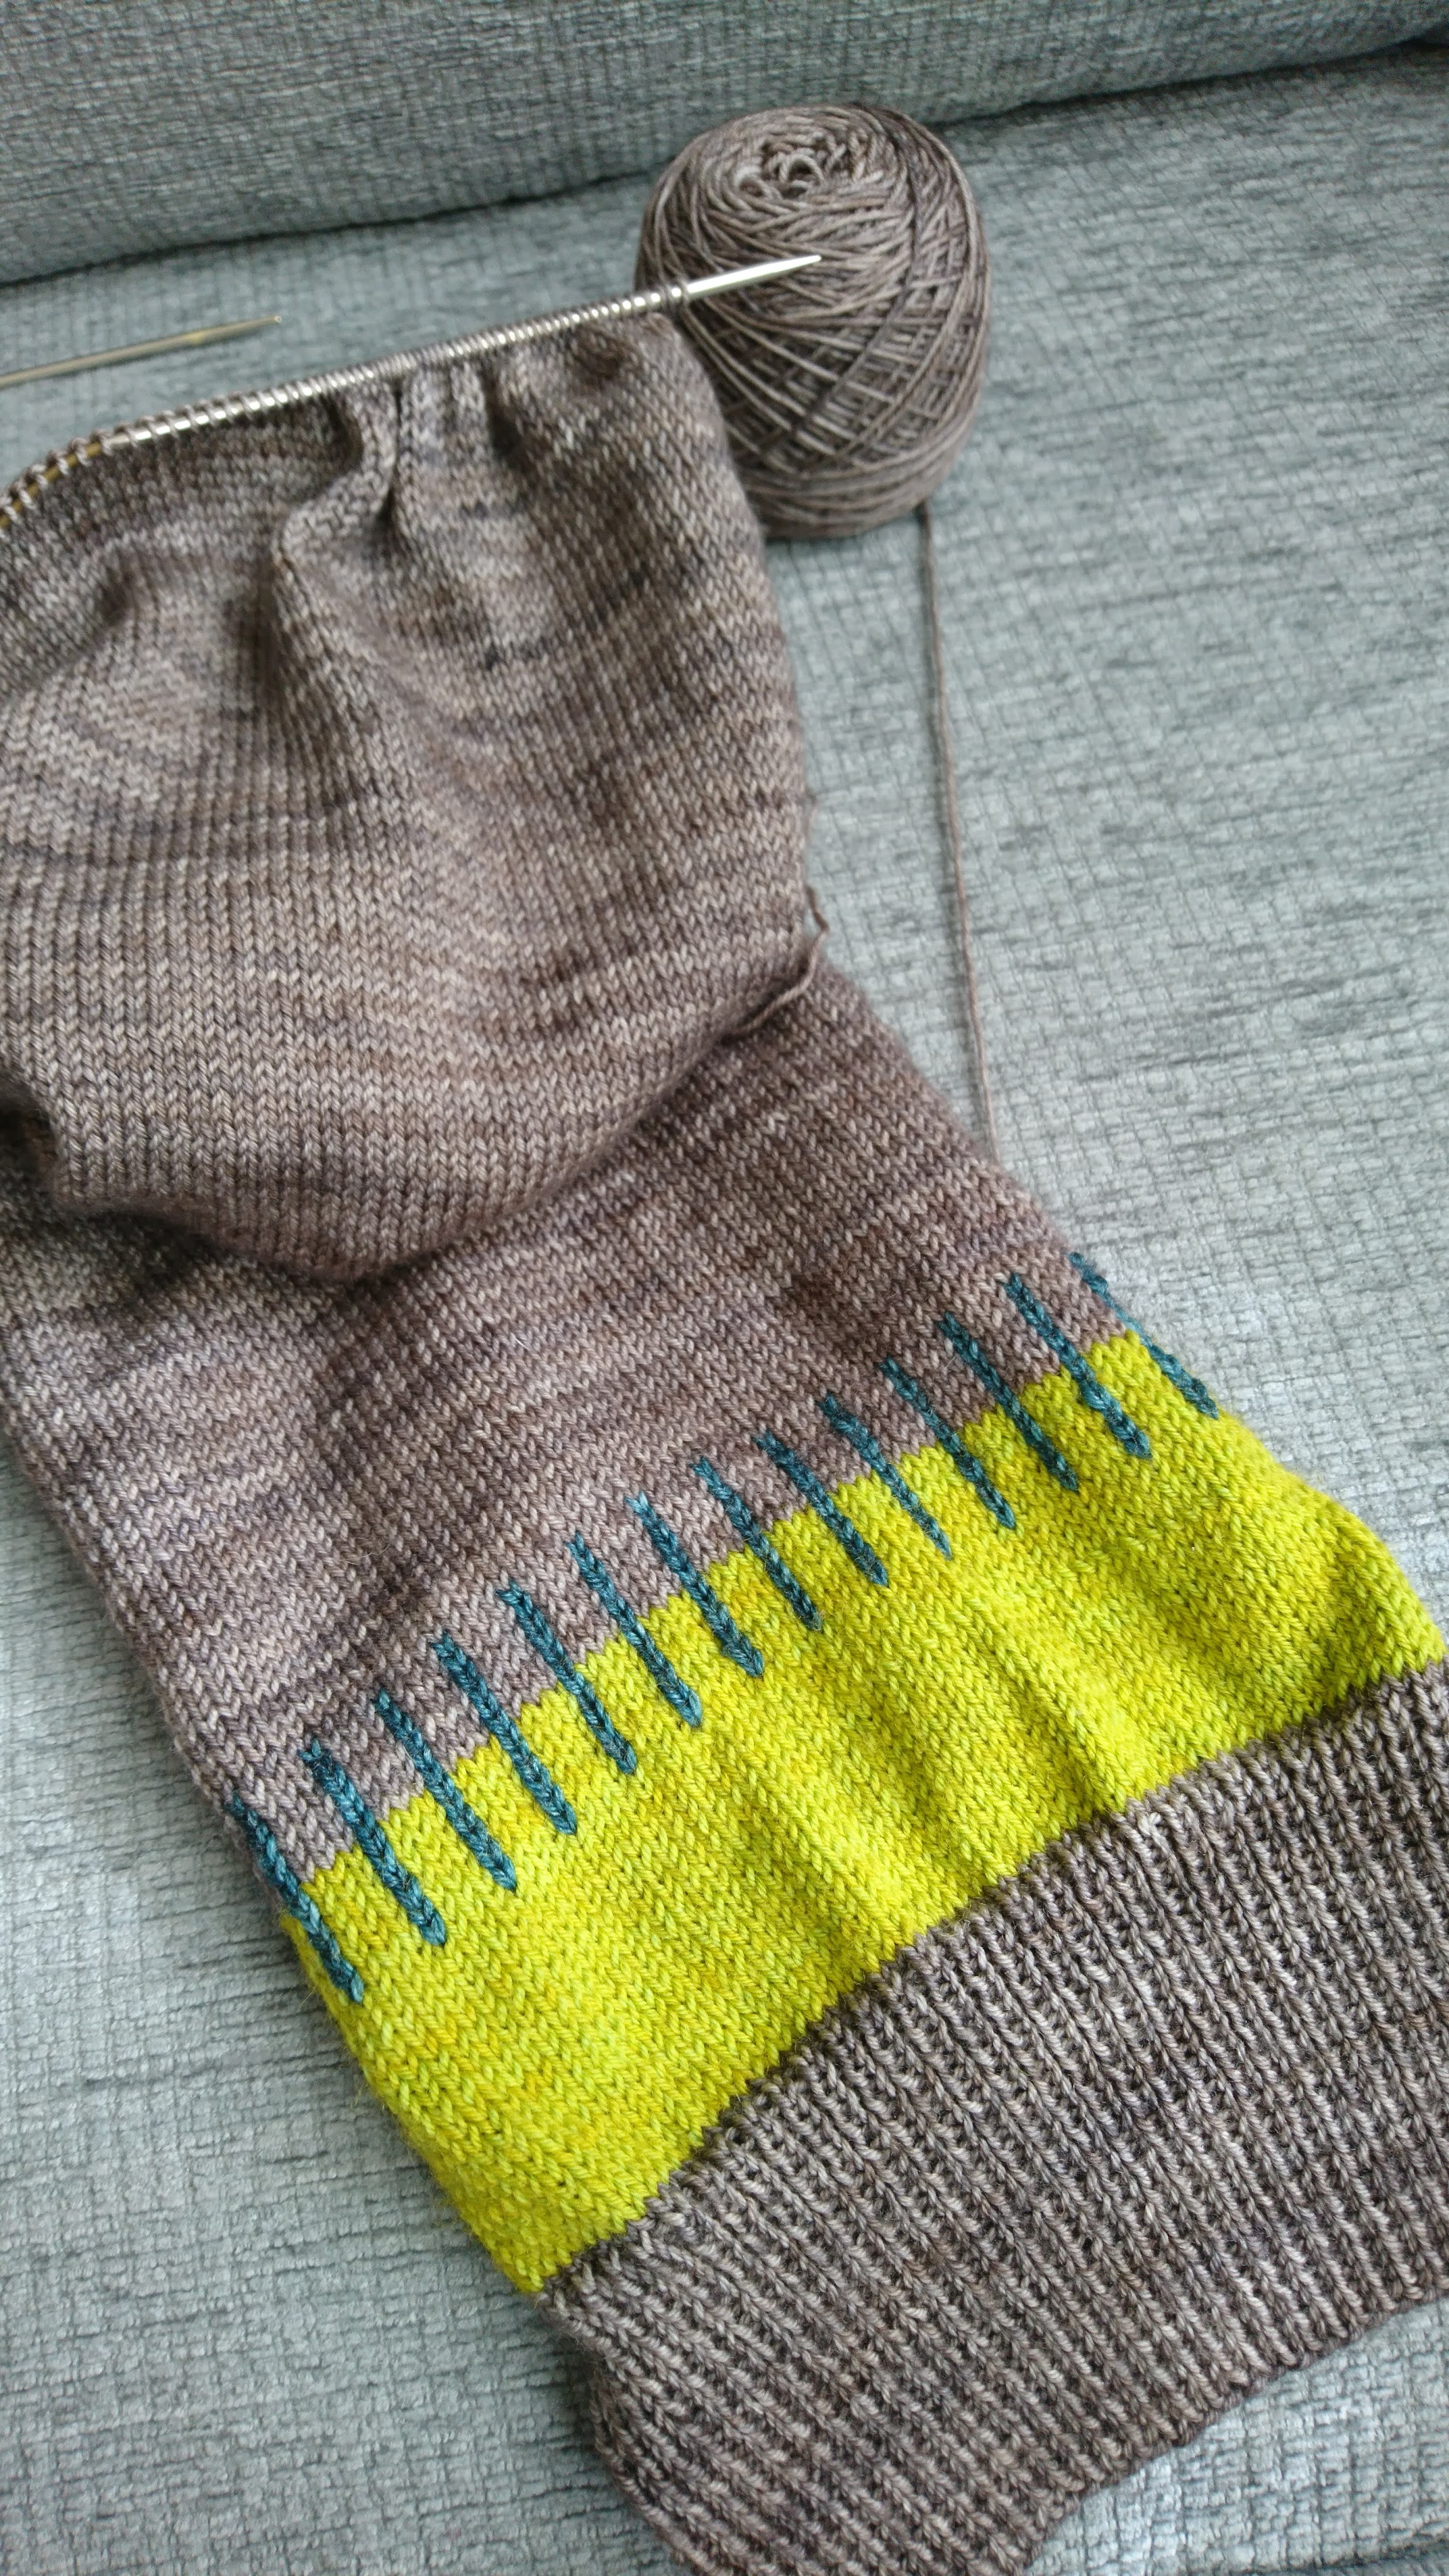 A knitted sleeve